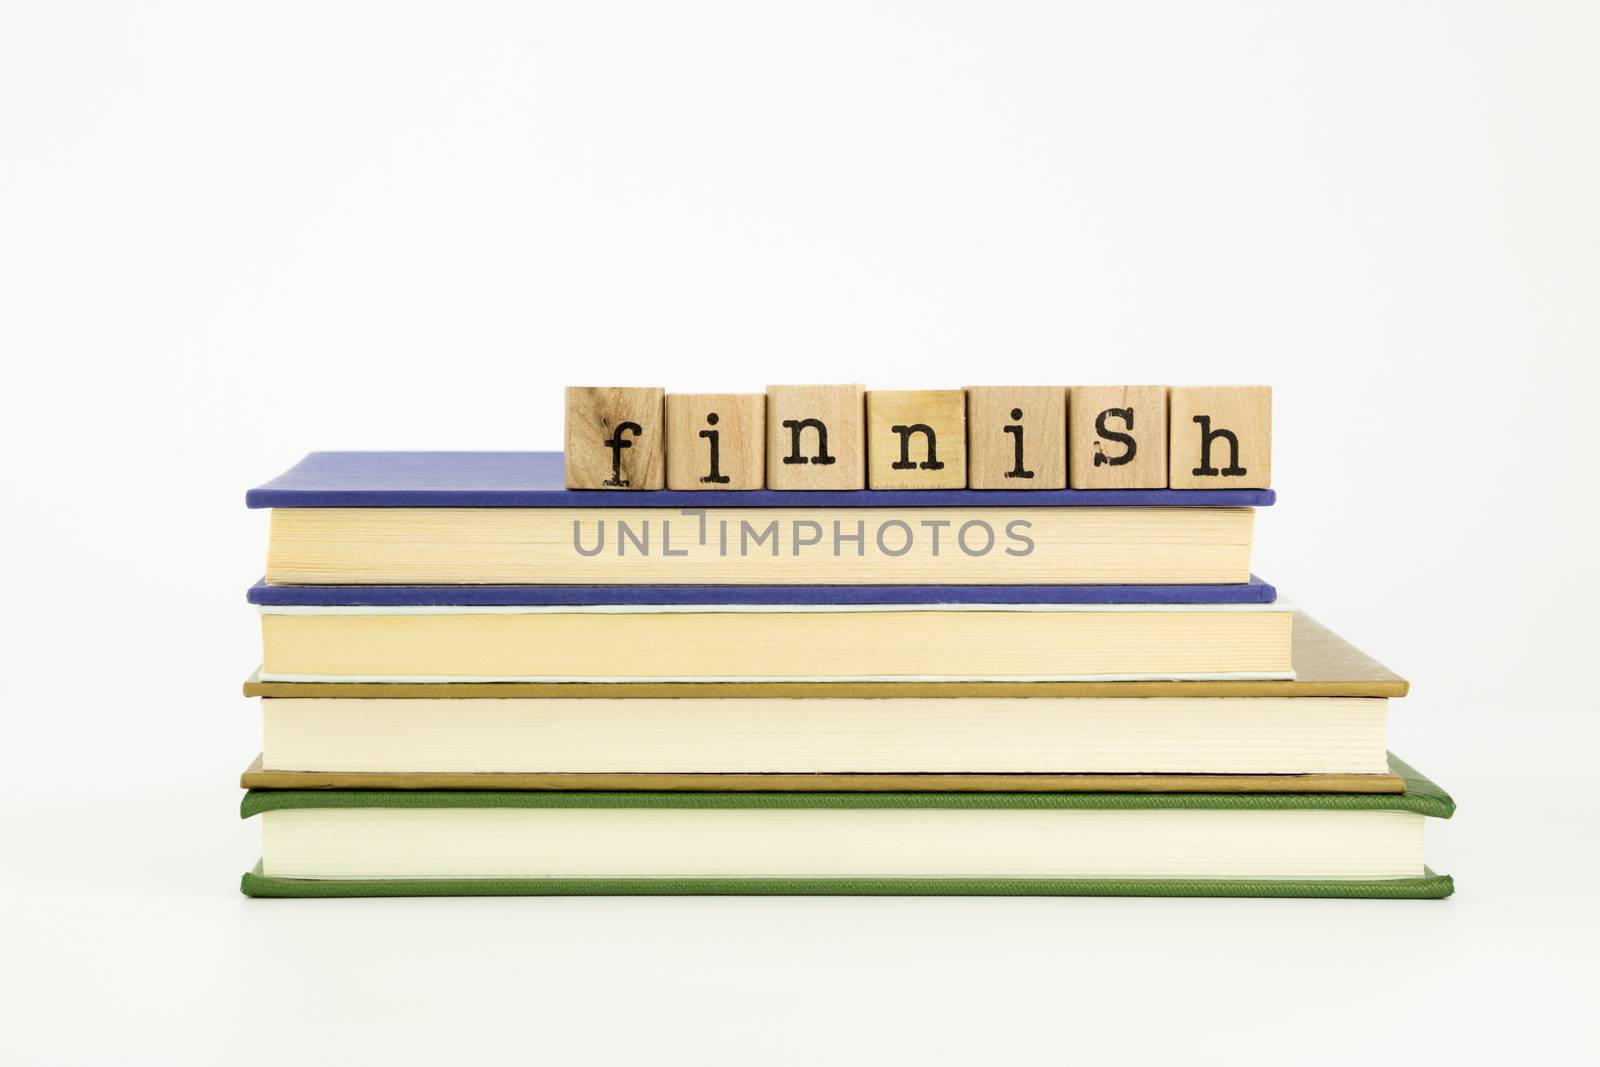 finnish language word on wood stamps and books by vinnstock